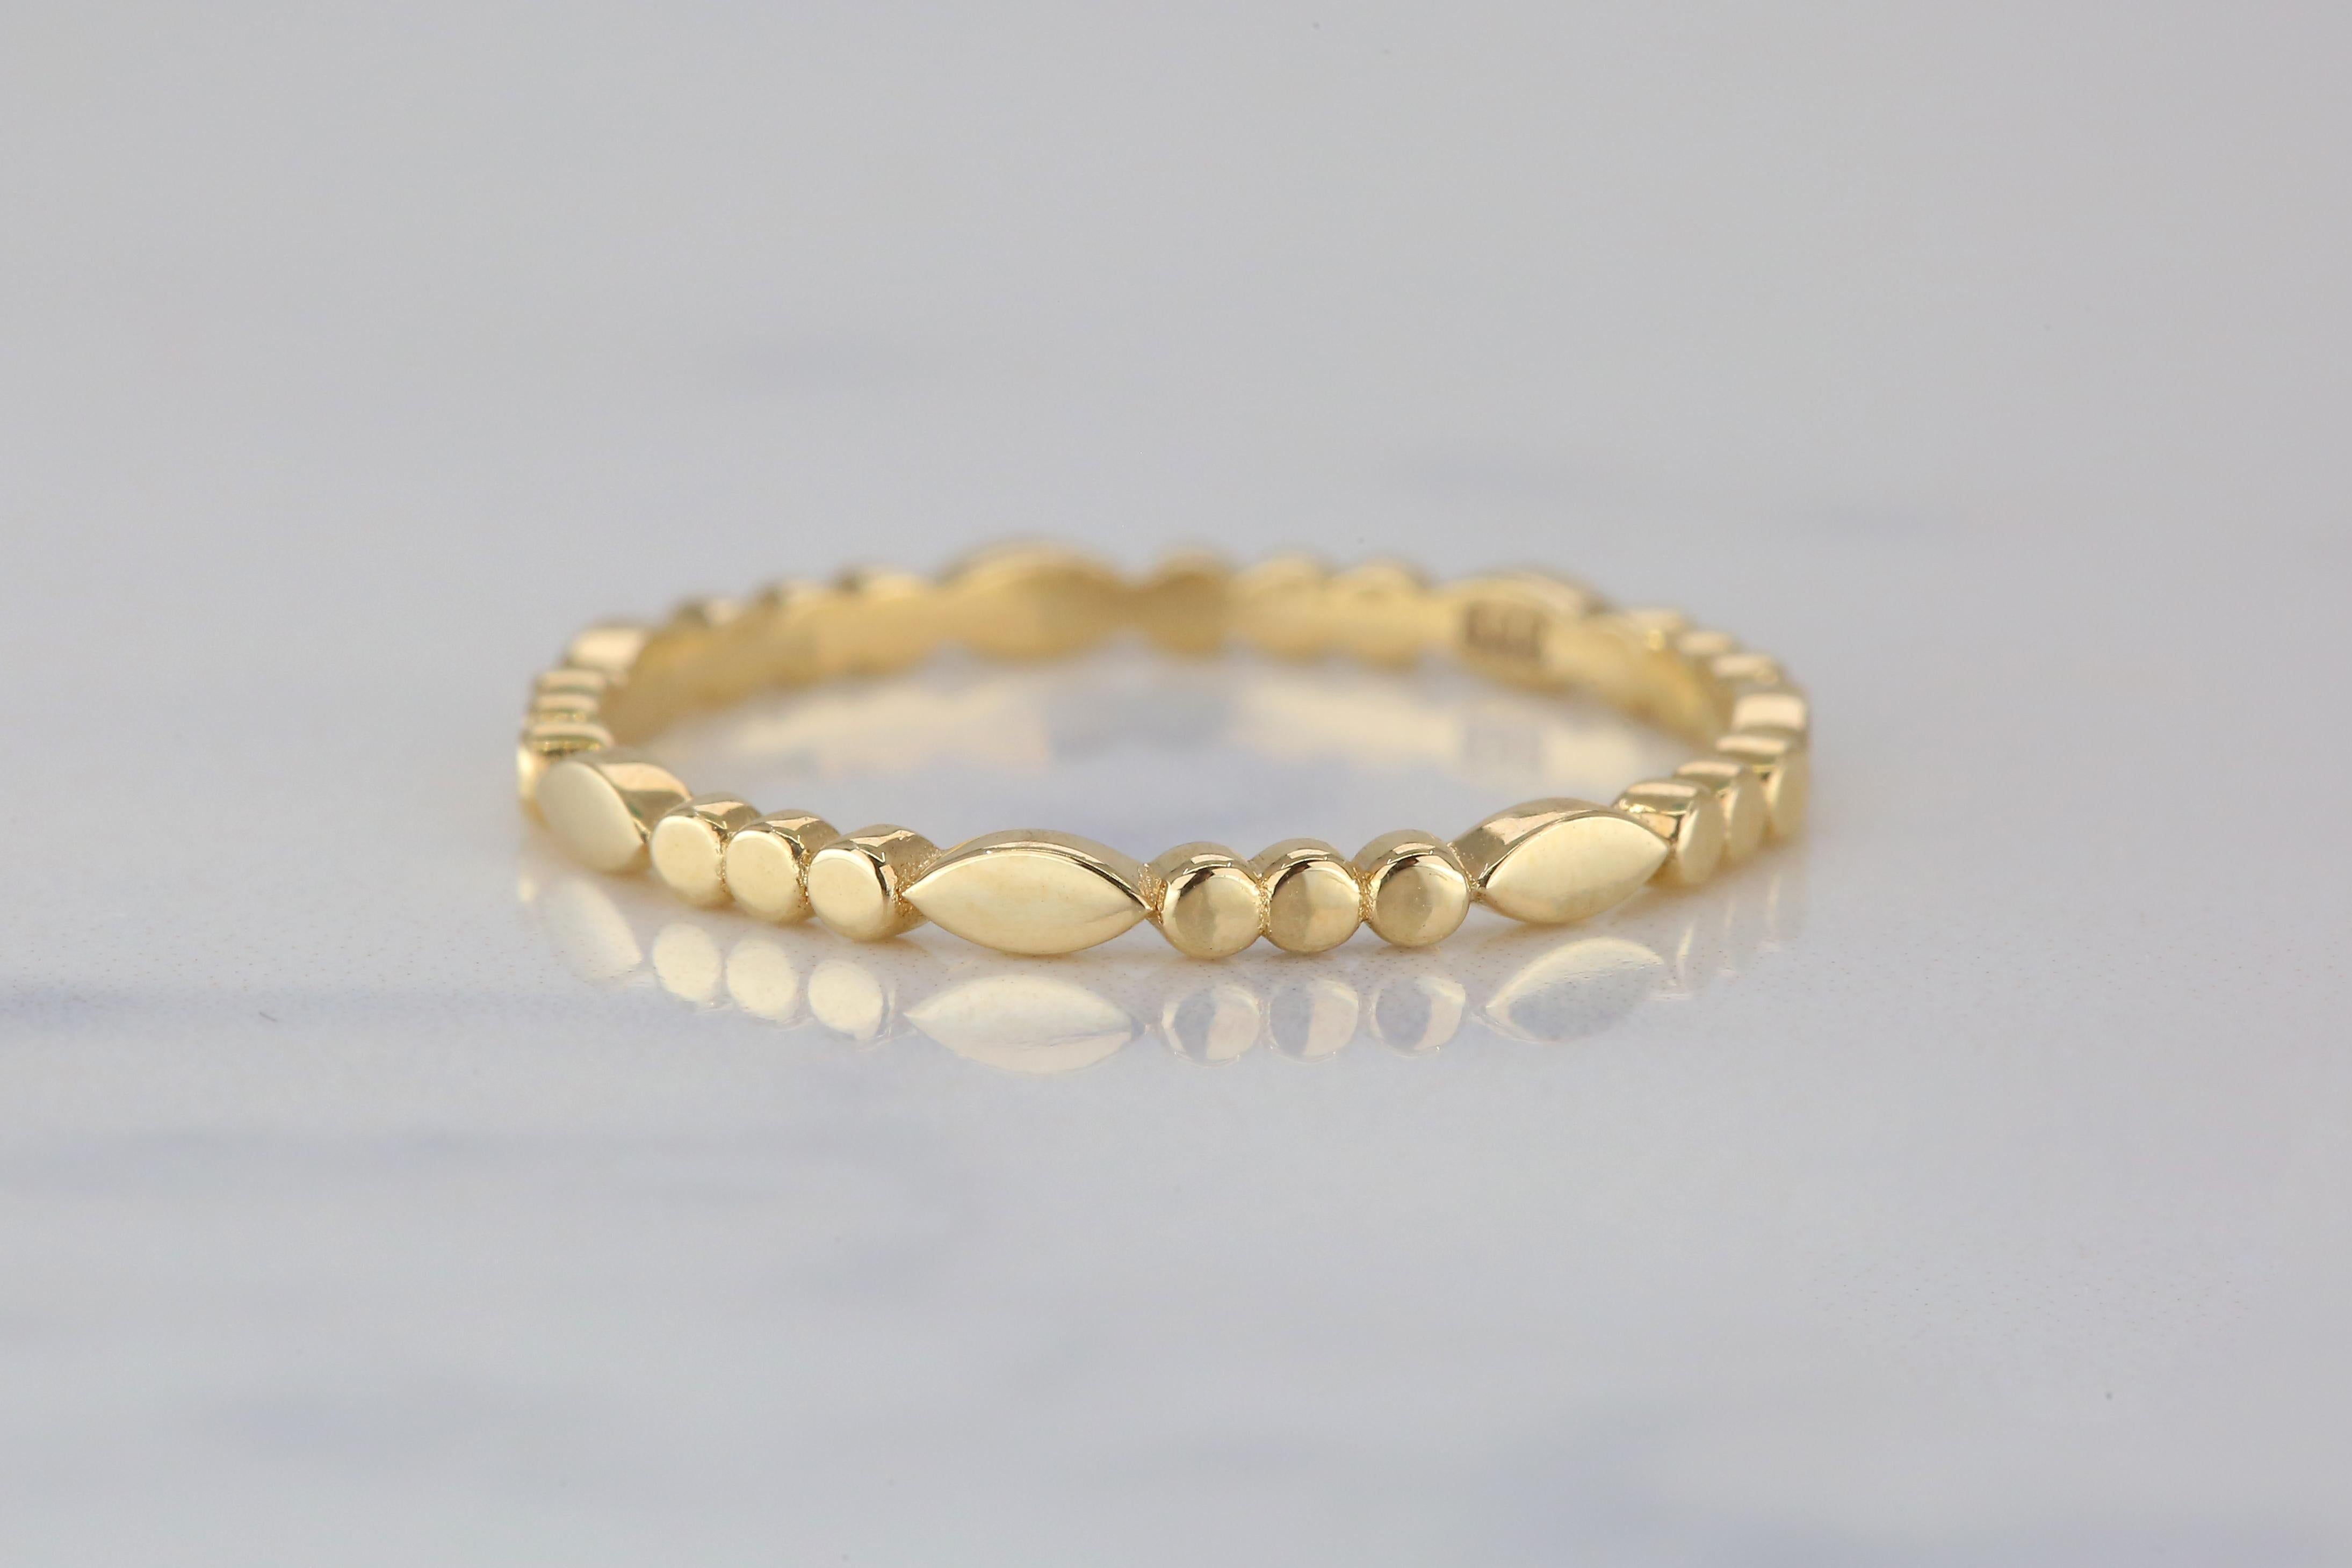 For Sale:  14 K Solid Gold Round Dot Ring Chain Link Ring, Modern Minimal Band Ring 6